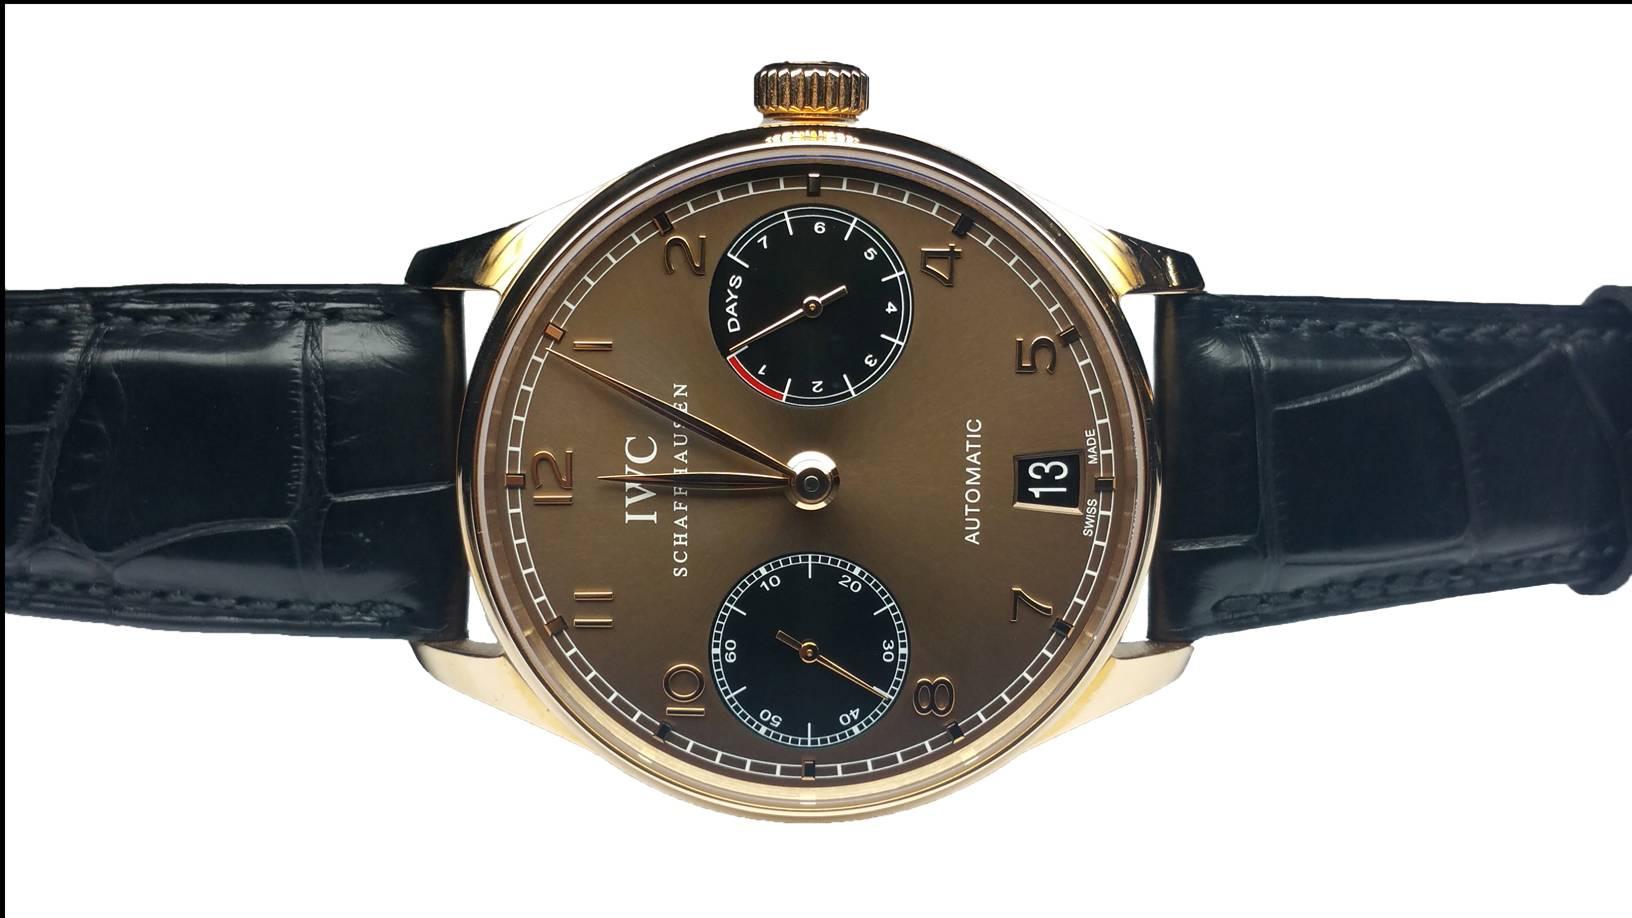 IWC Portuguese 7 Day Power Reserve Automatic, Limited Edition of 500 pieces, 42mm 18K Rose Gold Case, Automatic Movement with 7 Day Power Reserve, Brown Dial with Gold Arabic Numbers, Black Sweep Sec & Power Reserve Sub-dials, Sapphire Crystal,